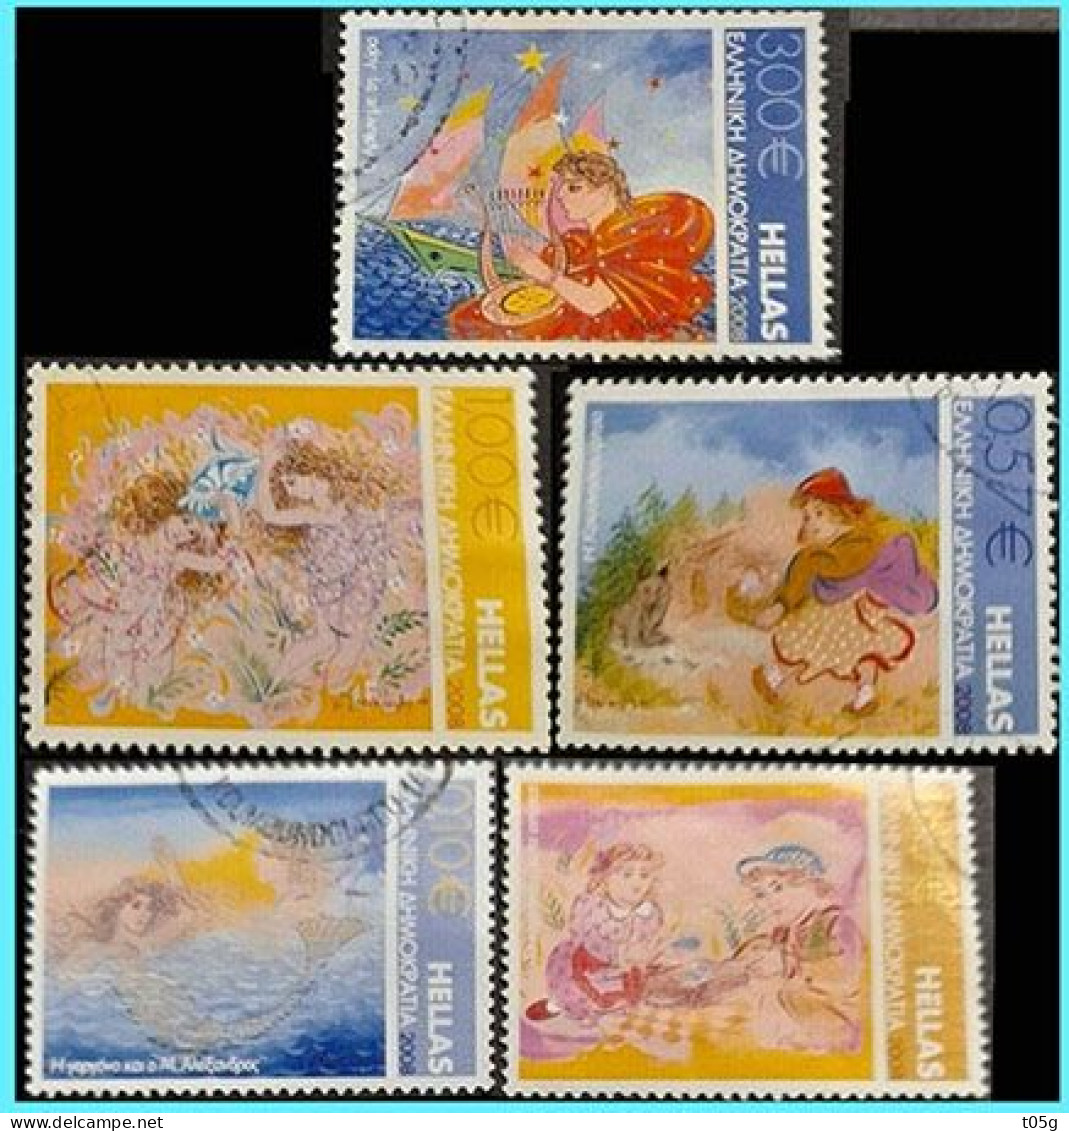 GREECE - GRECE- HELLAS- 2008: Compl. Set Used - Used Stamps